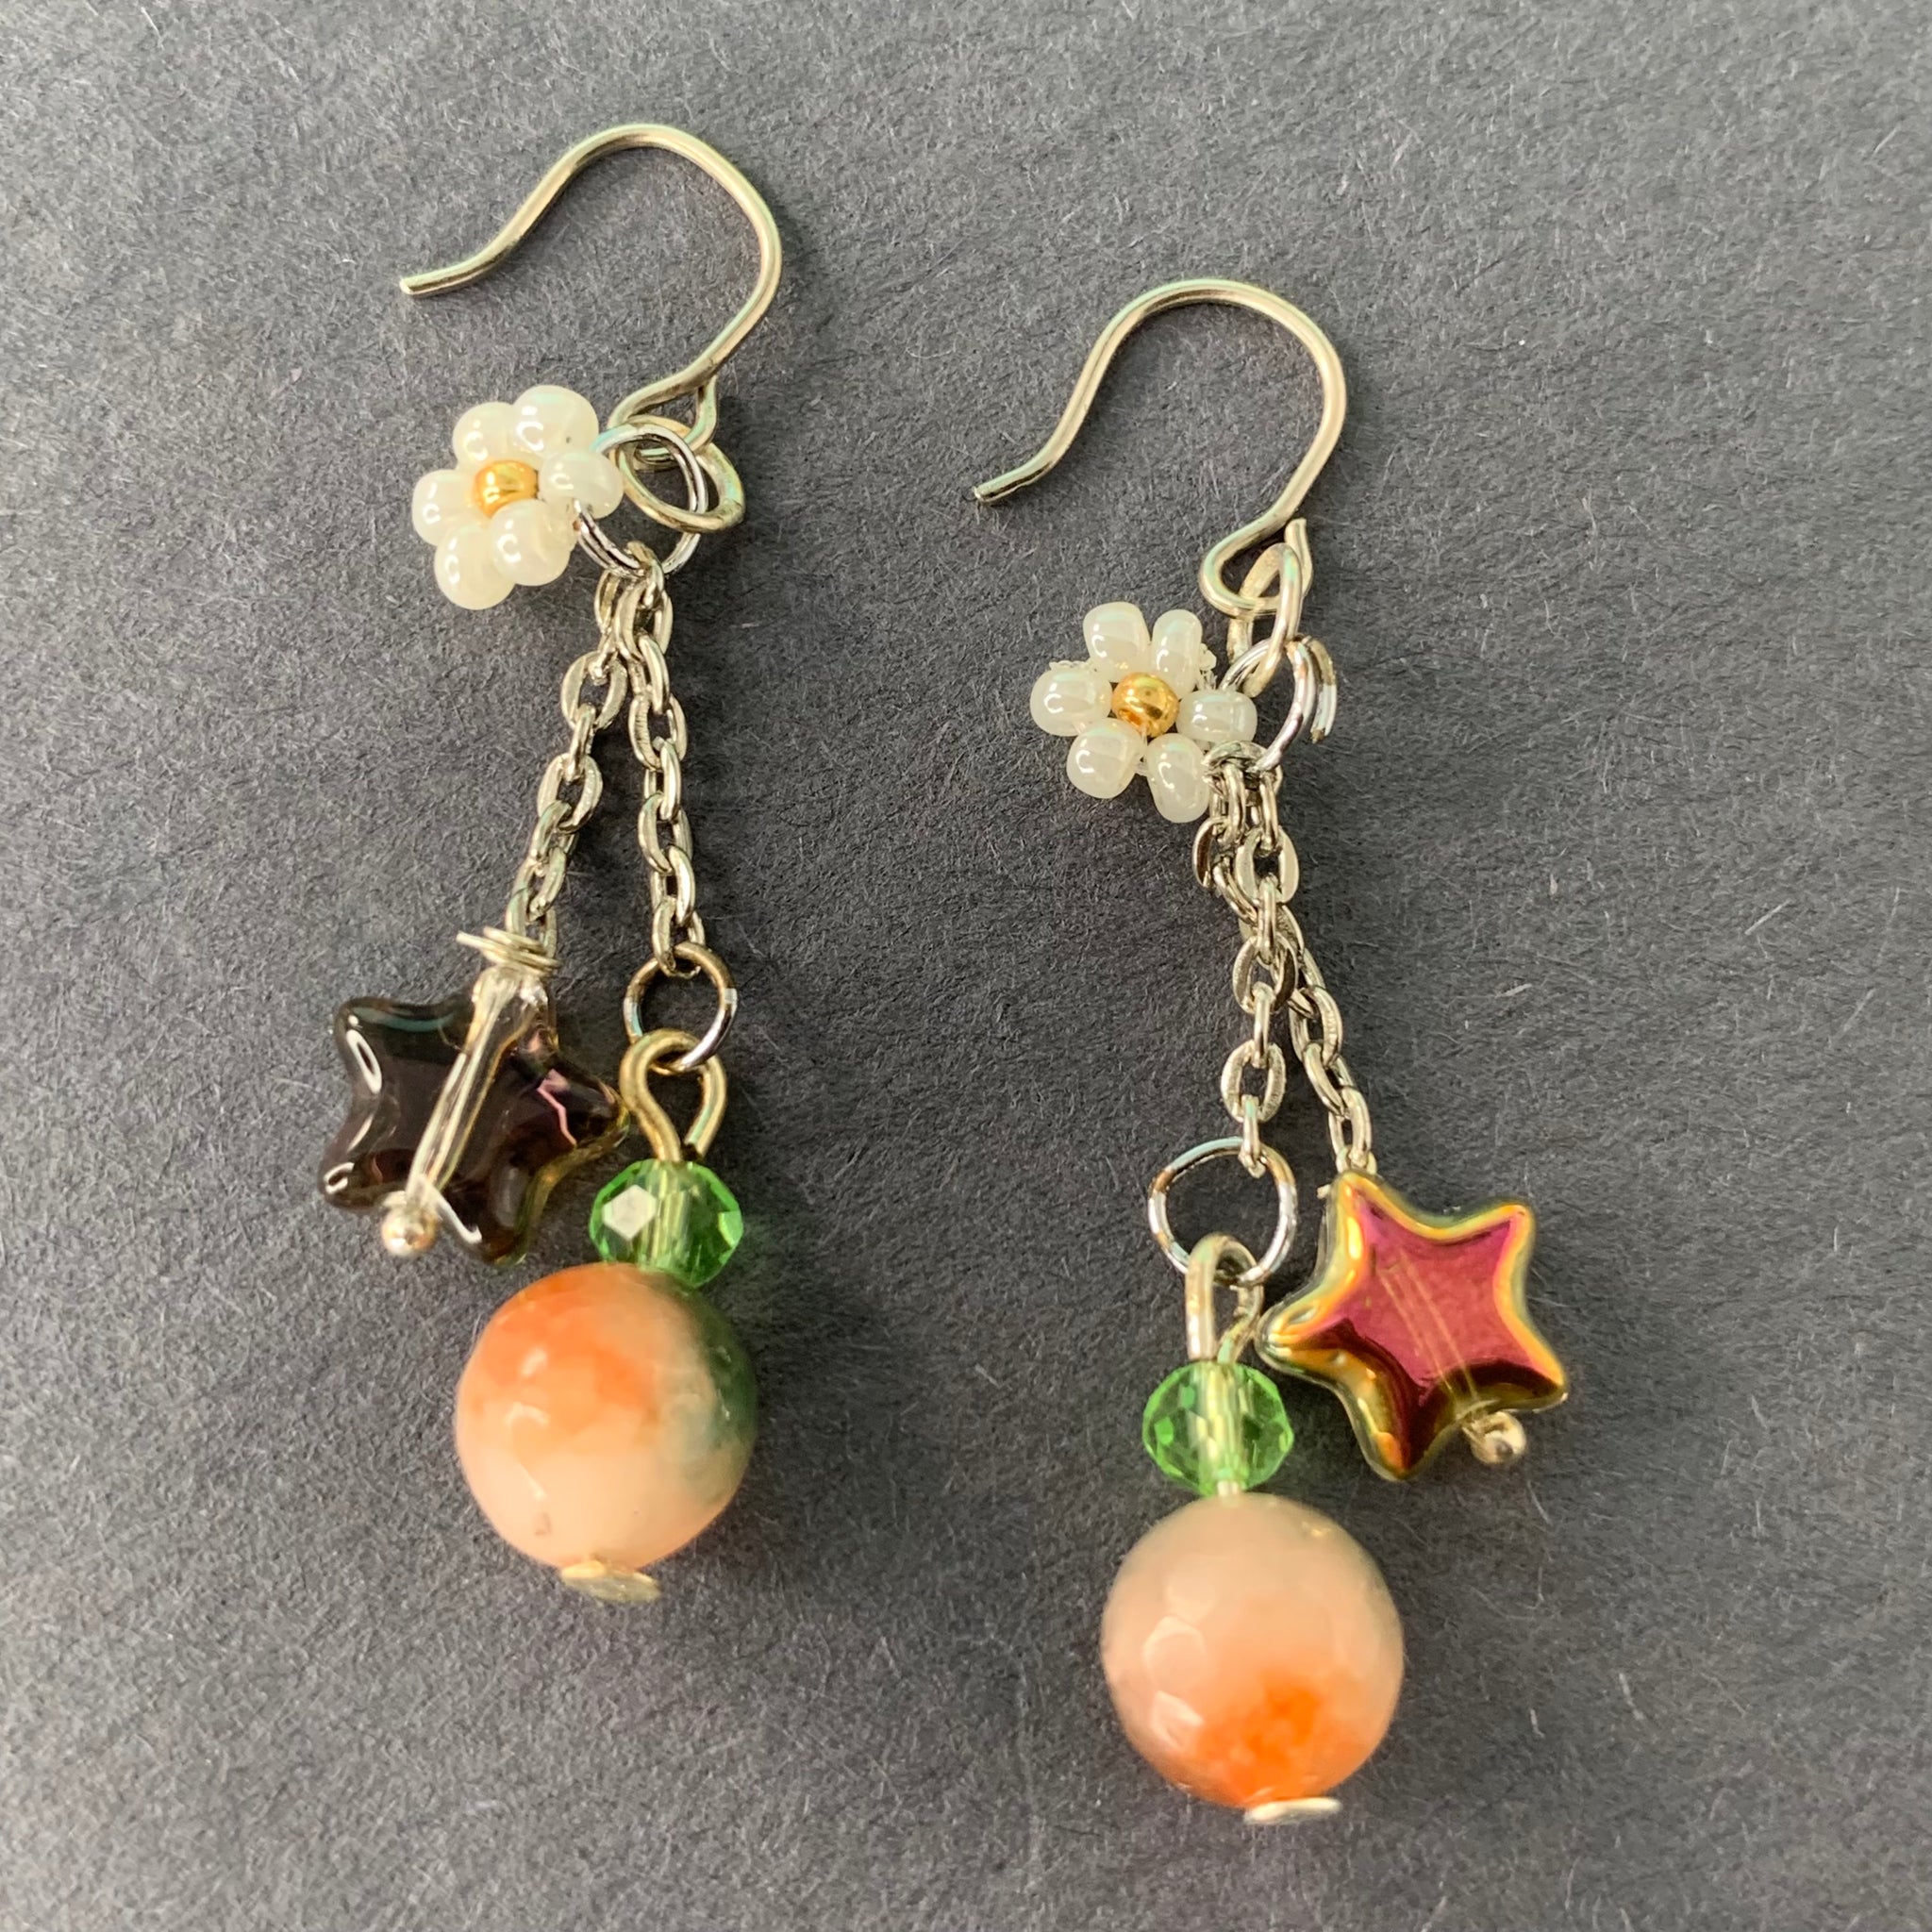 Real agates beads and daisy beads bracelet with glass star charm earrings